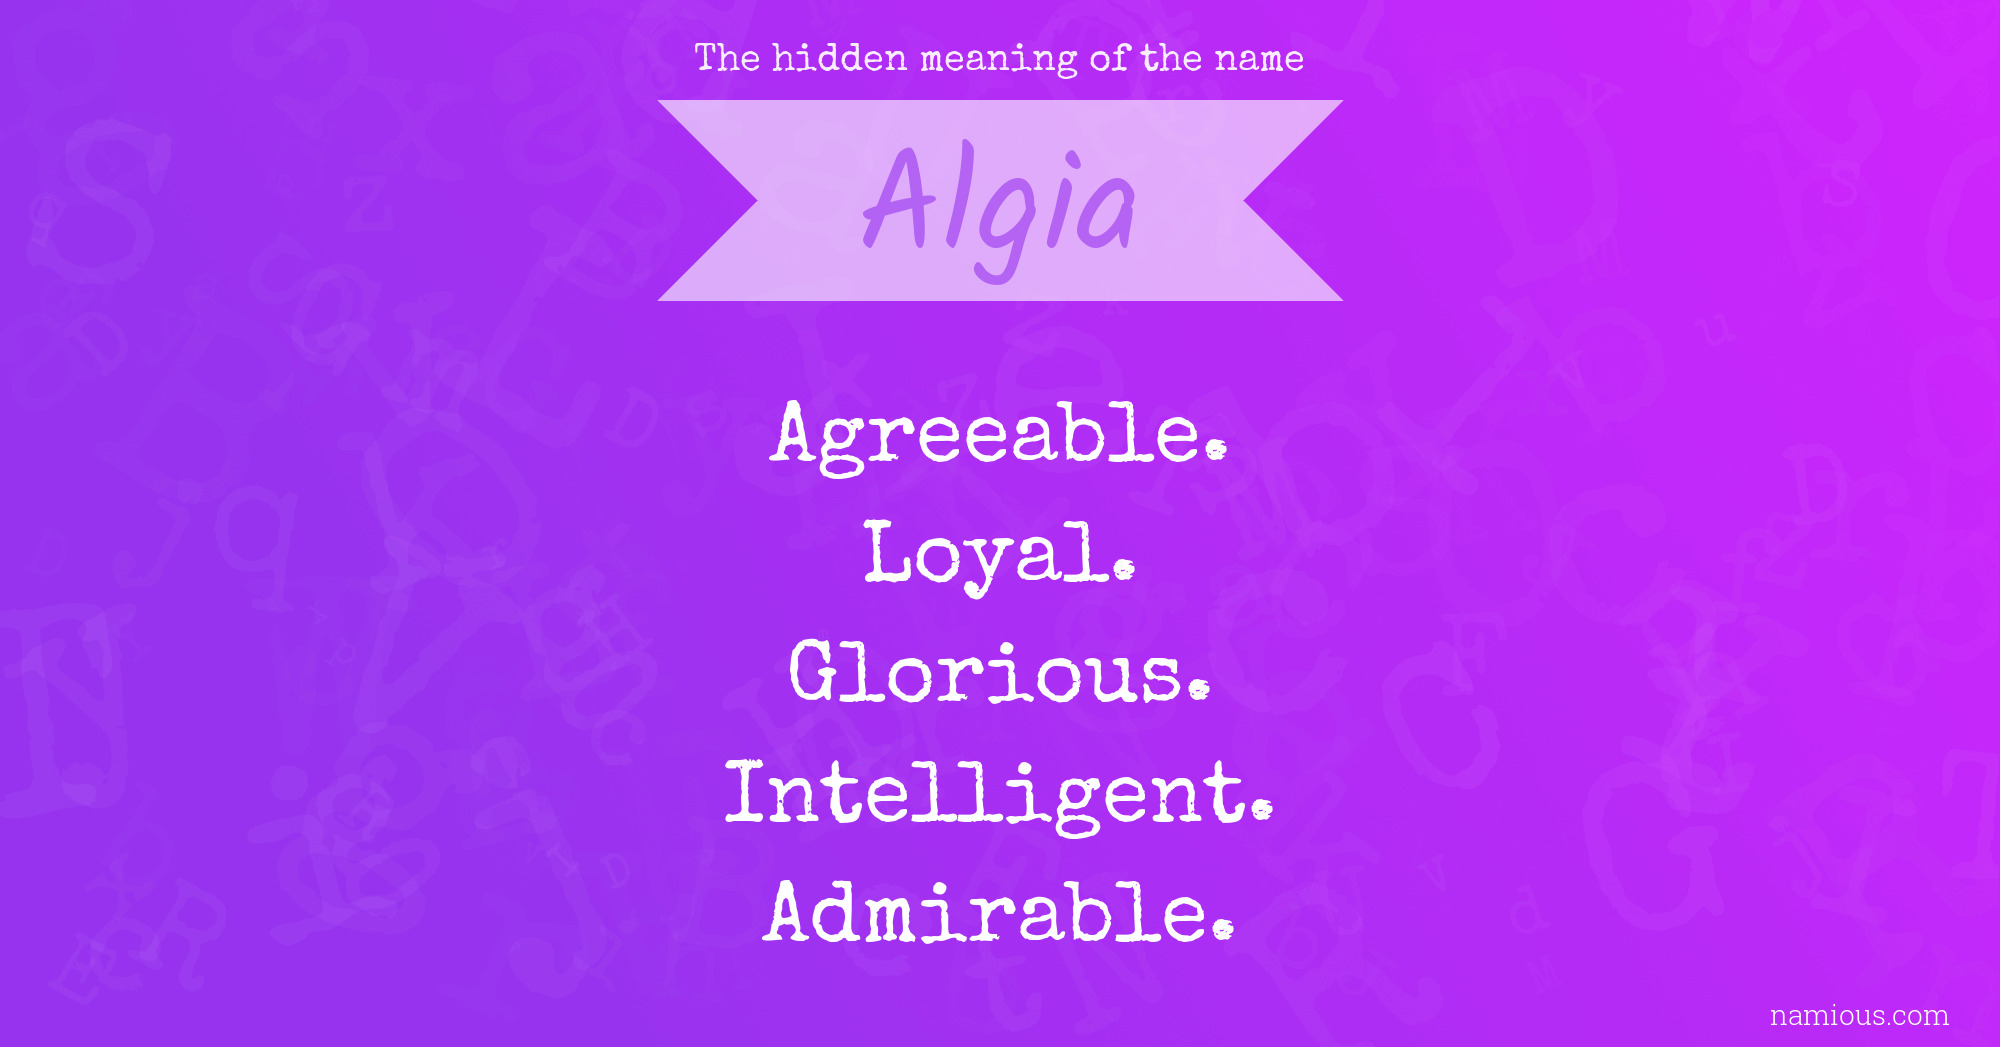 The hidden meaning of the name Algia